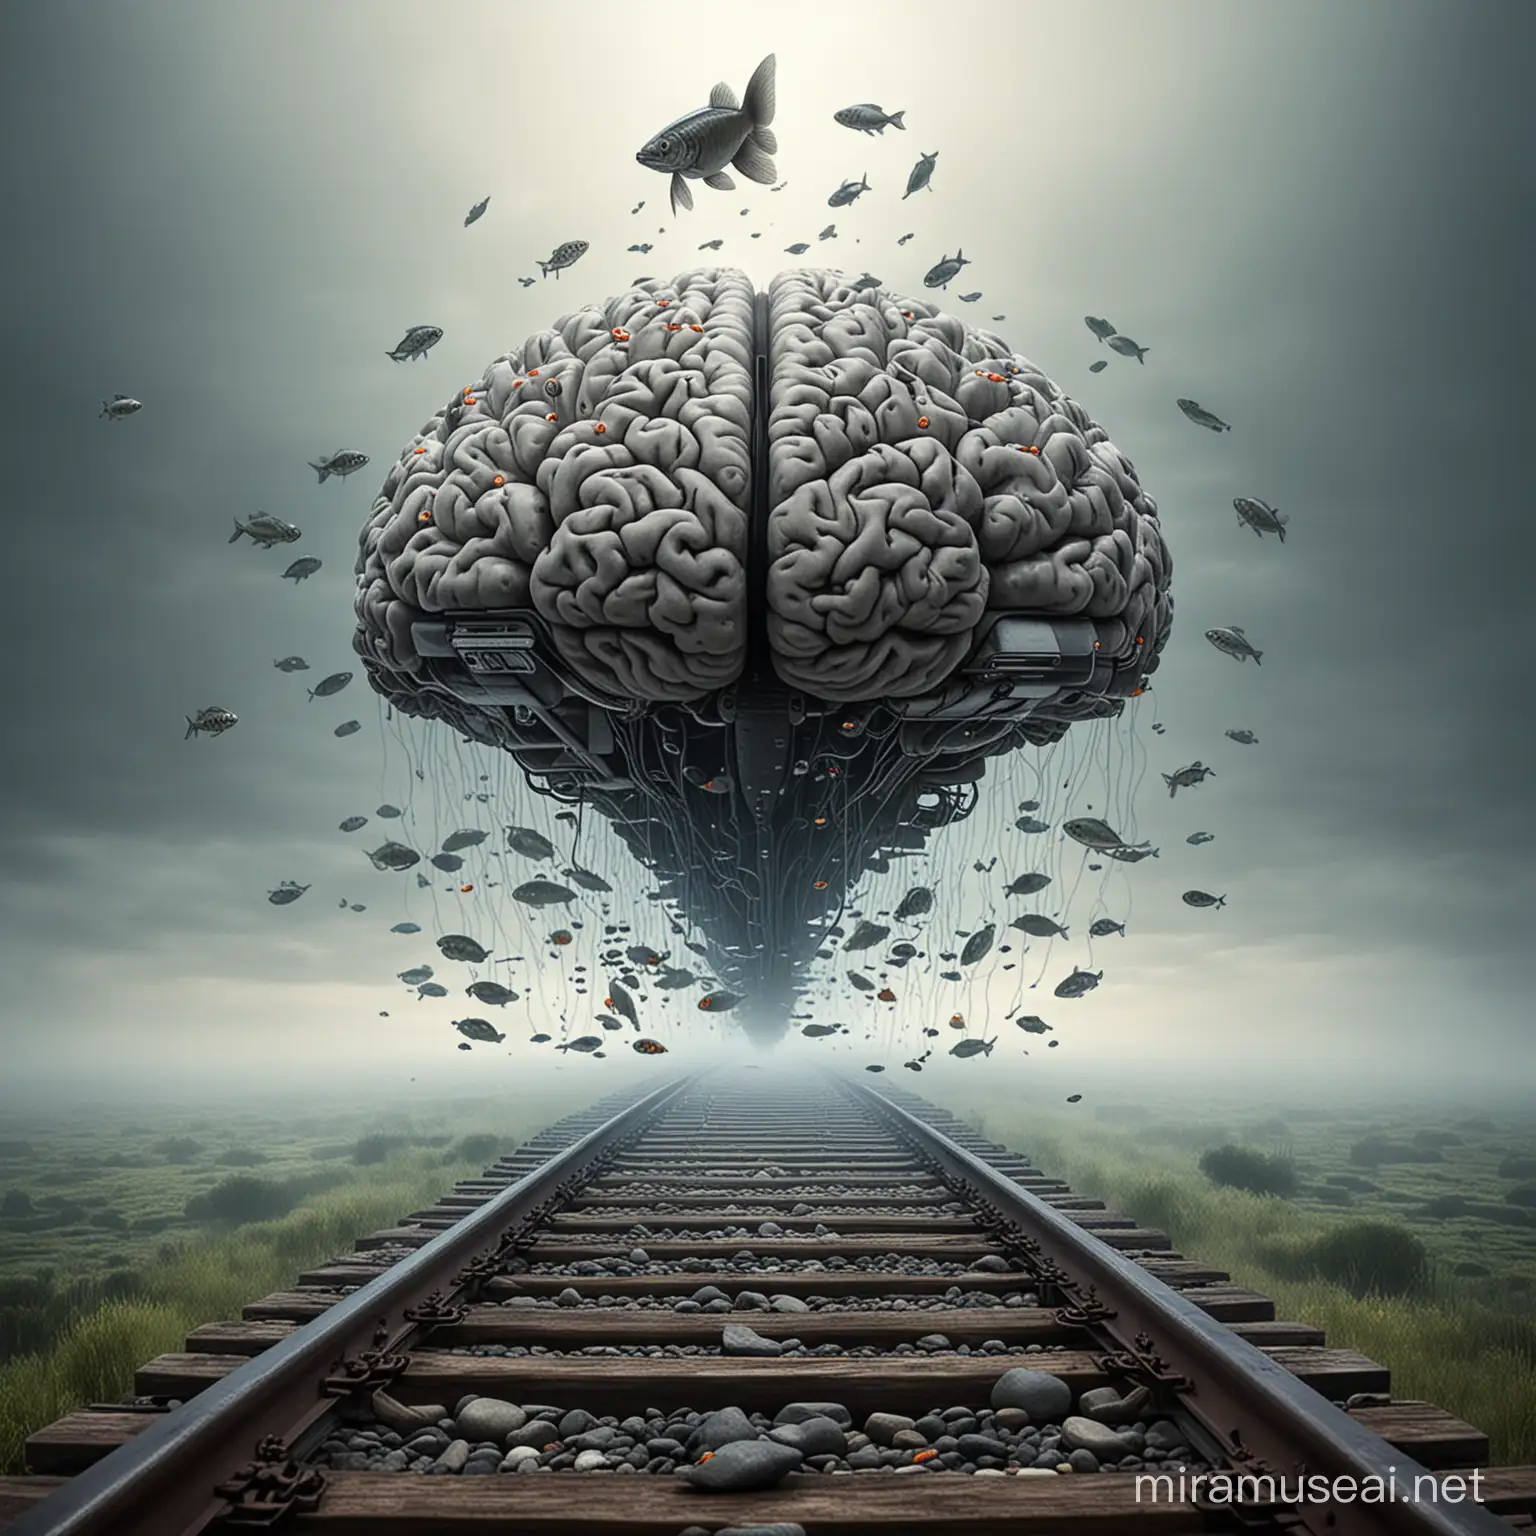 A brain is railways, with floating trains, and walking fish.